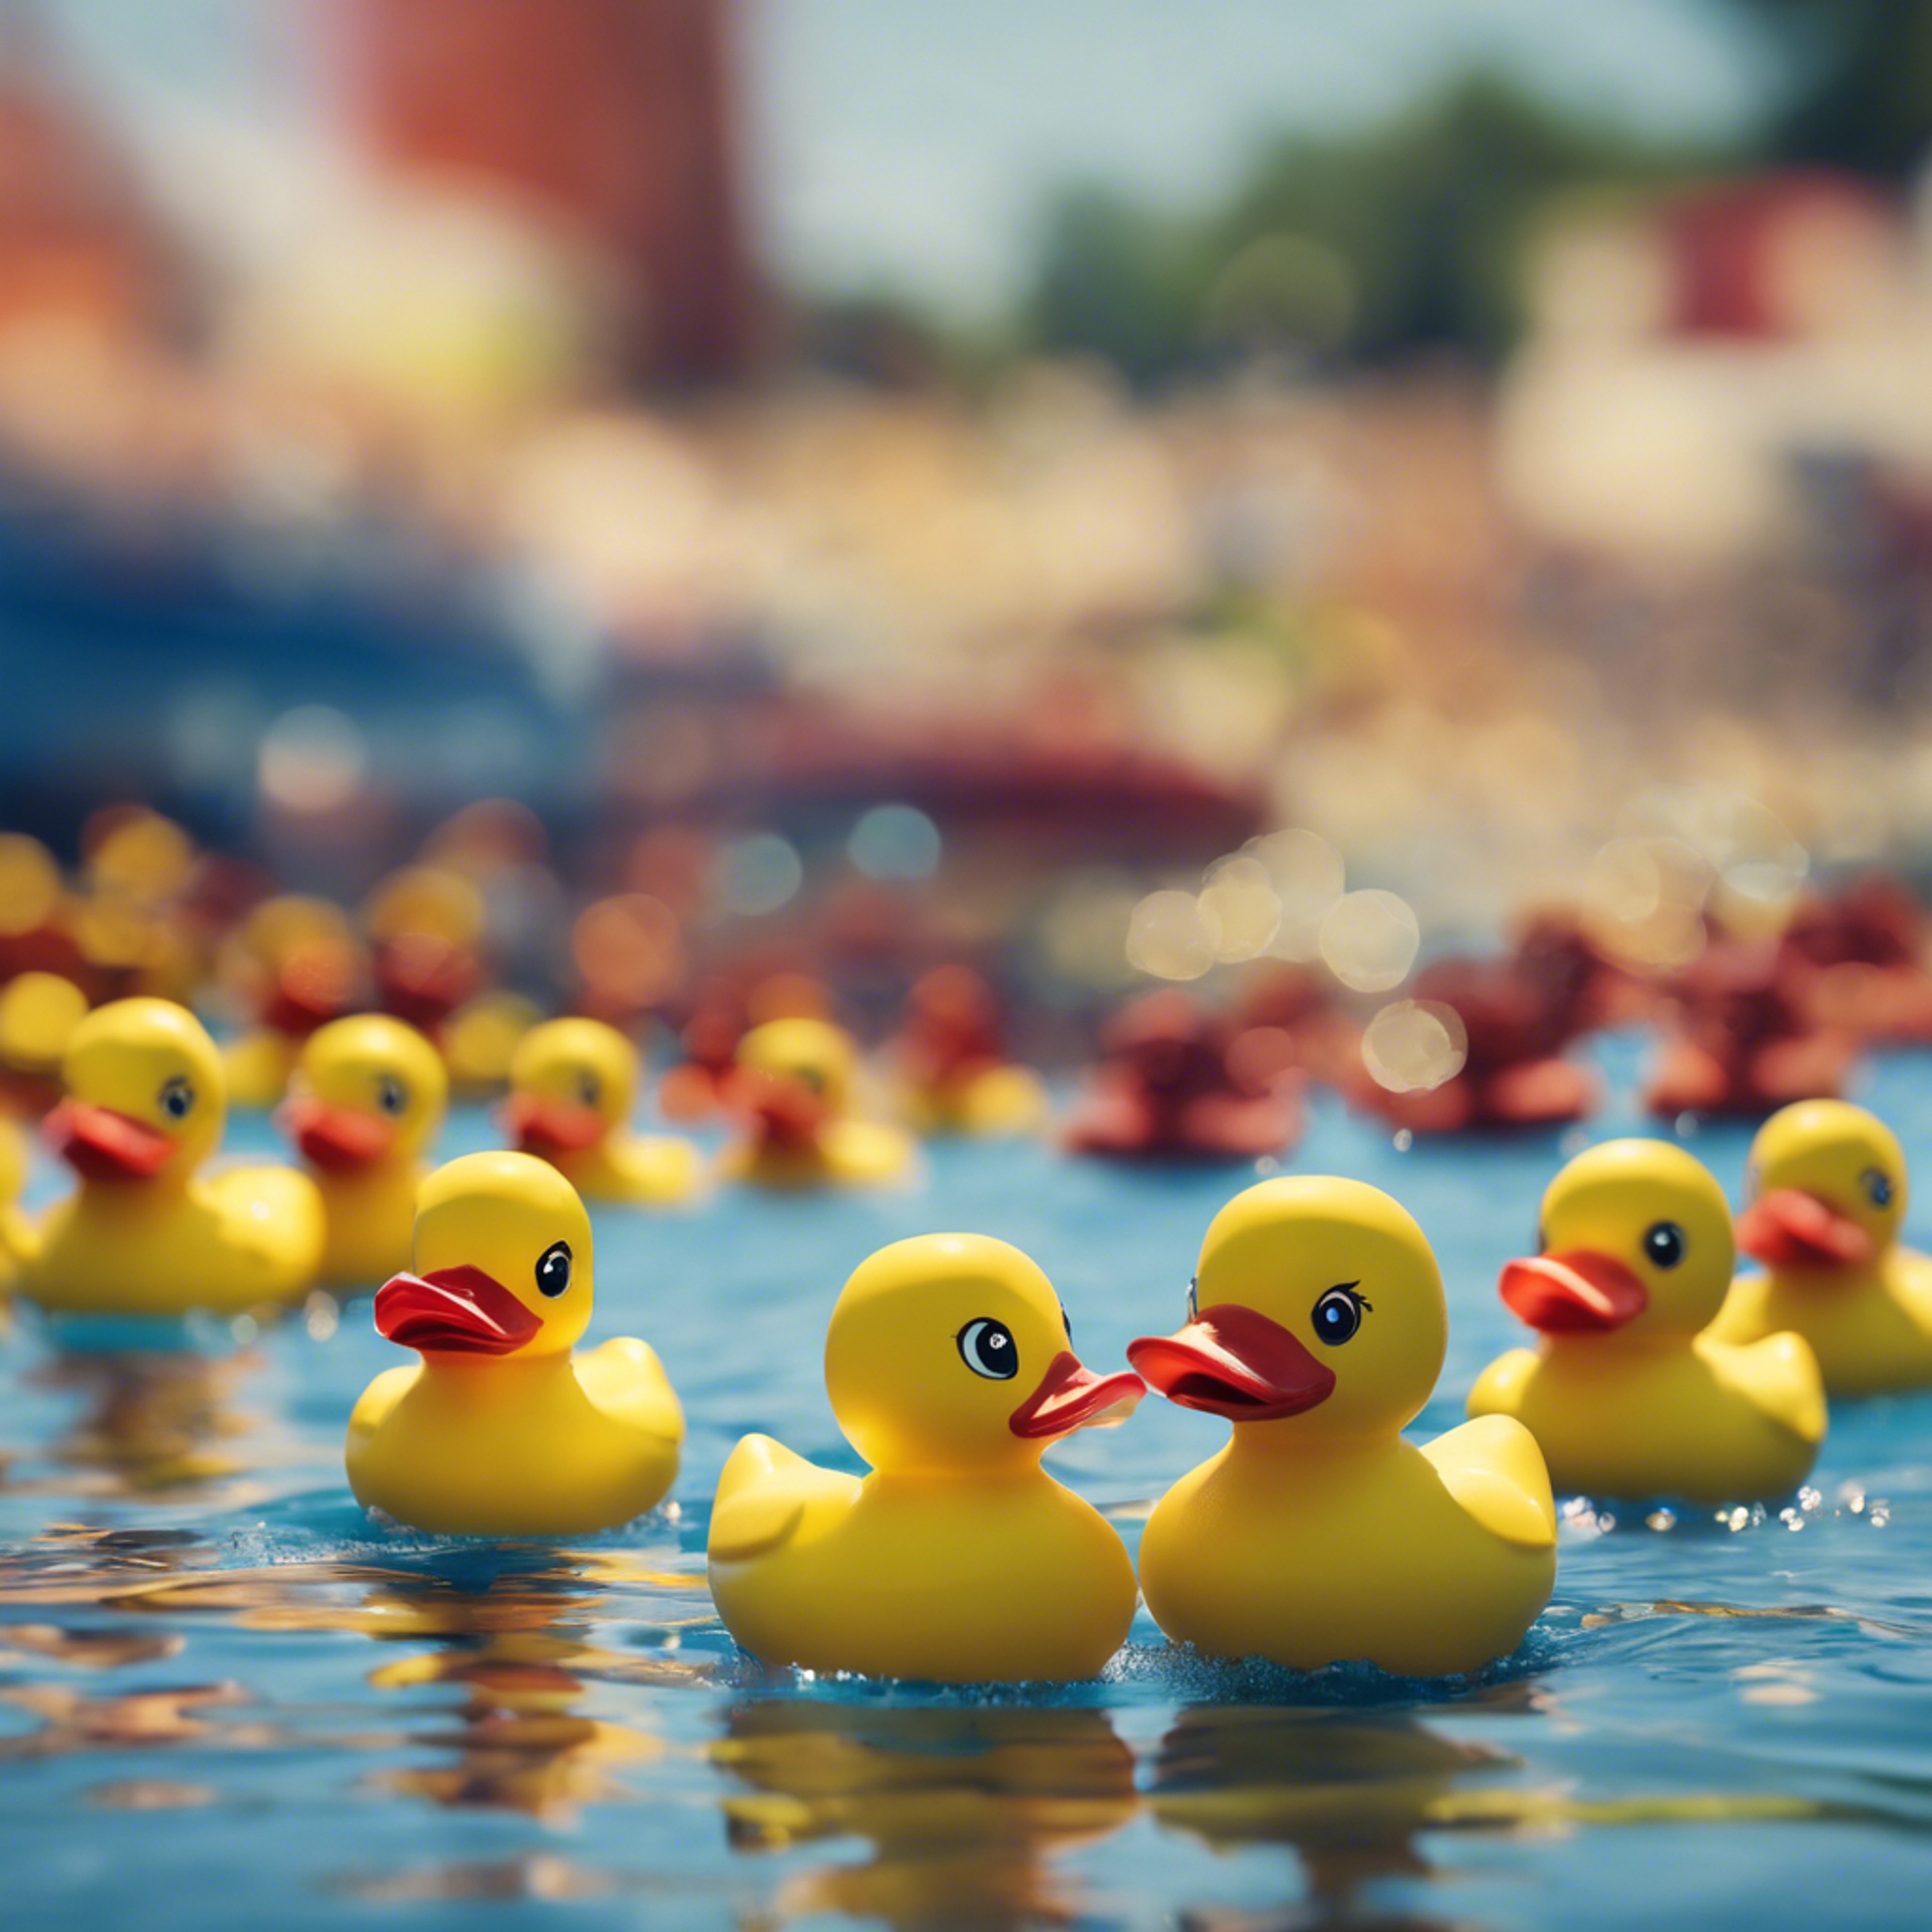 A team of vibrant rubber ducks lined up for a fun bath-time race. Tapetai[f8bfe643527940e89331]